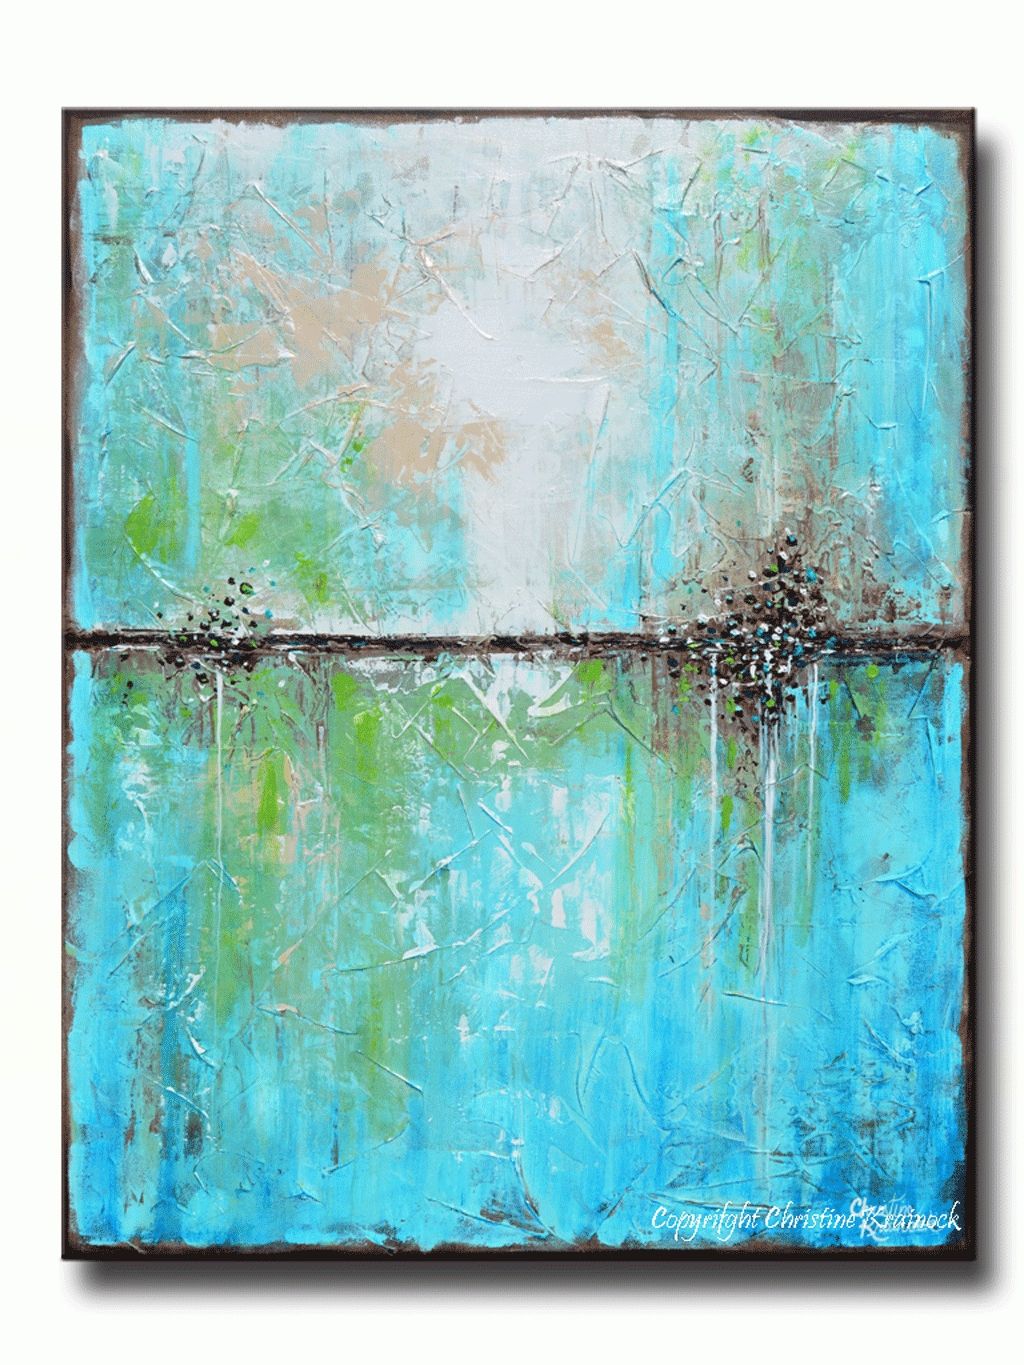 Wall Art Designs: Blue Wall Art Art Abstract Painting Aqua Blue With Most Recent Duck Egg Blue Canvas Wall Art (View 15 of 15)